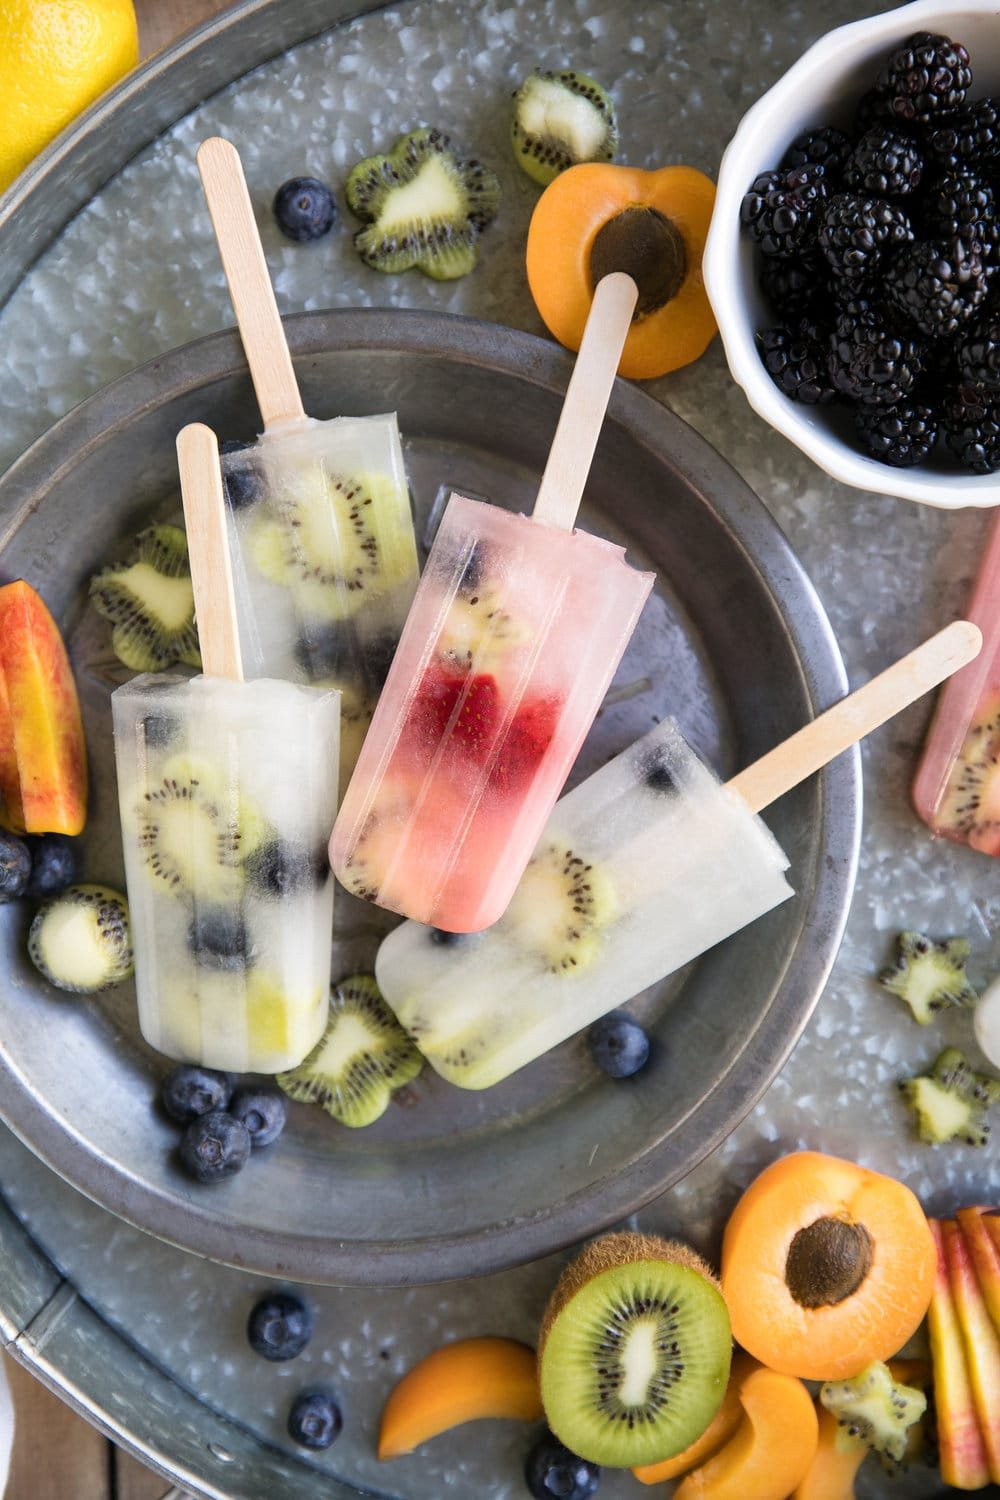 Homemade lemonade and fruit popsicles on a metal serving tray.